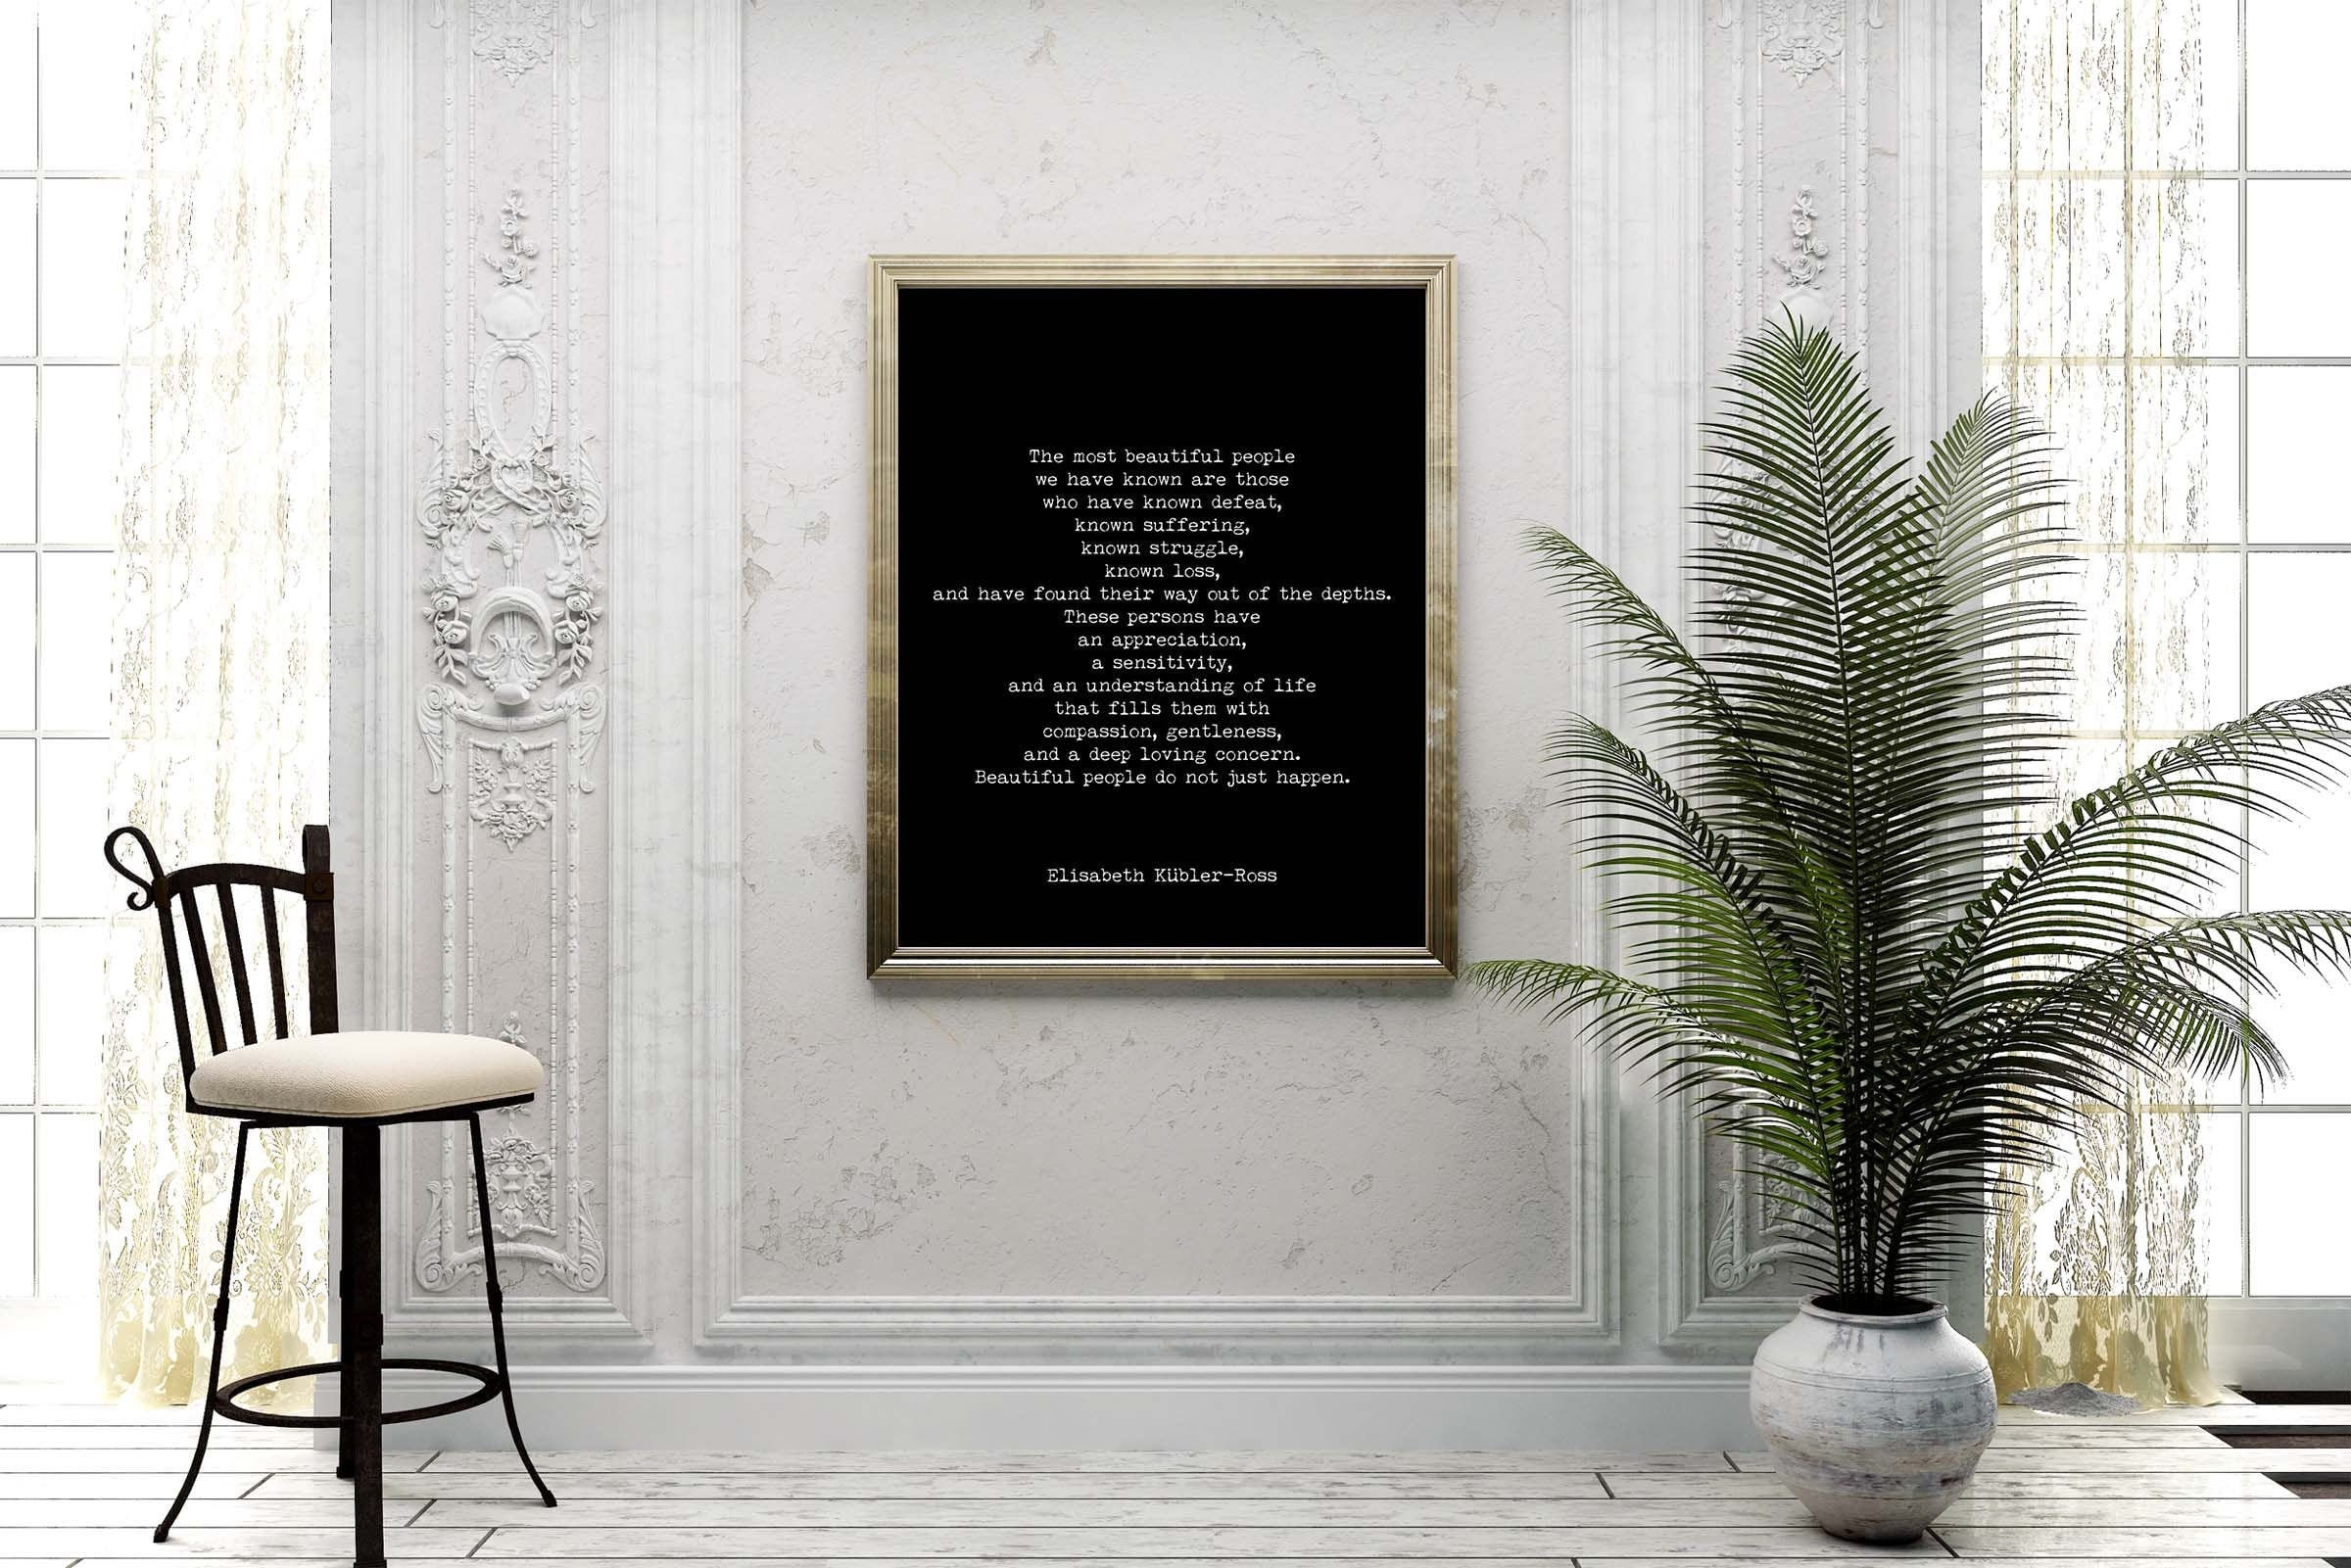 The Most Beautiful People Quote Print, Elisabeth Kubler-Ross Wall Art Print